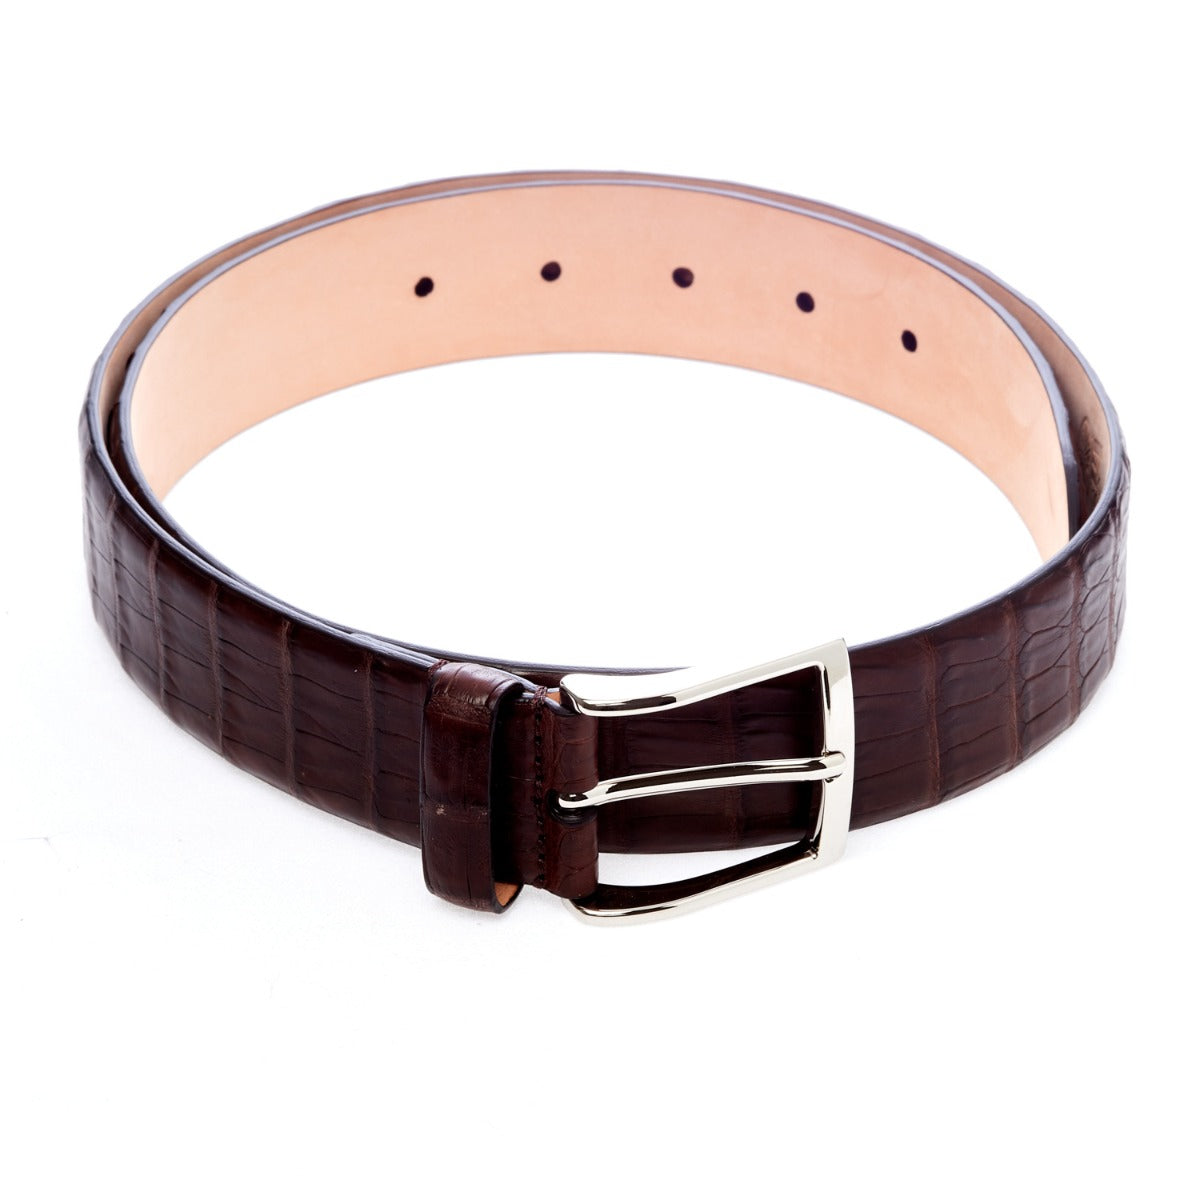 A Sovereign Grade Medium Brown Crocodile Belt with a satin finish on a white background, from KirbyAllison.com.